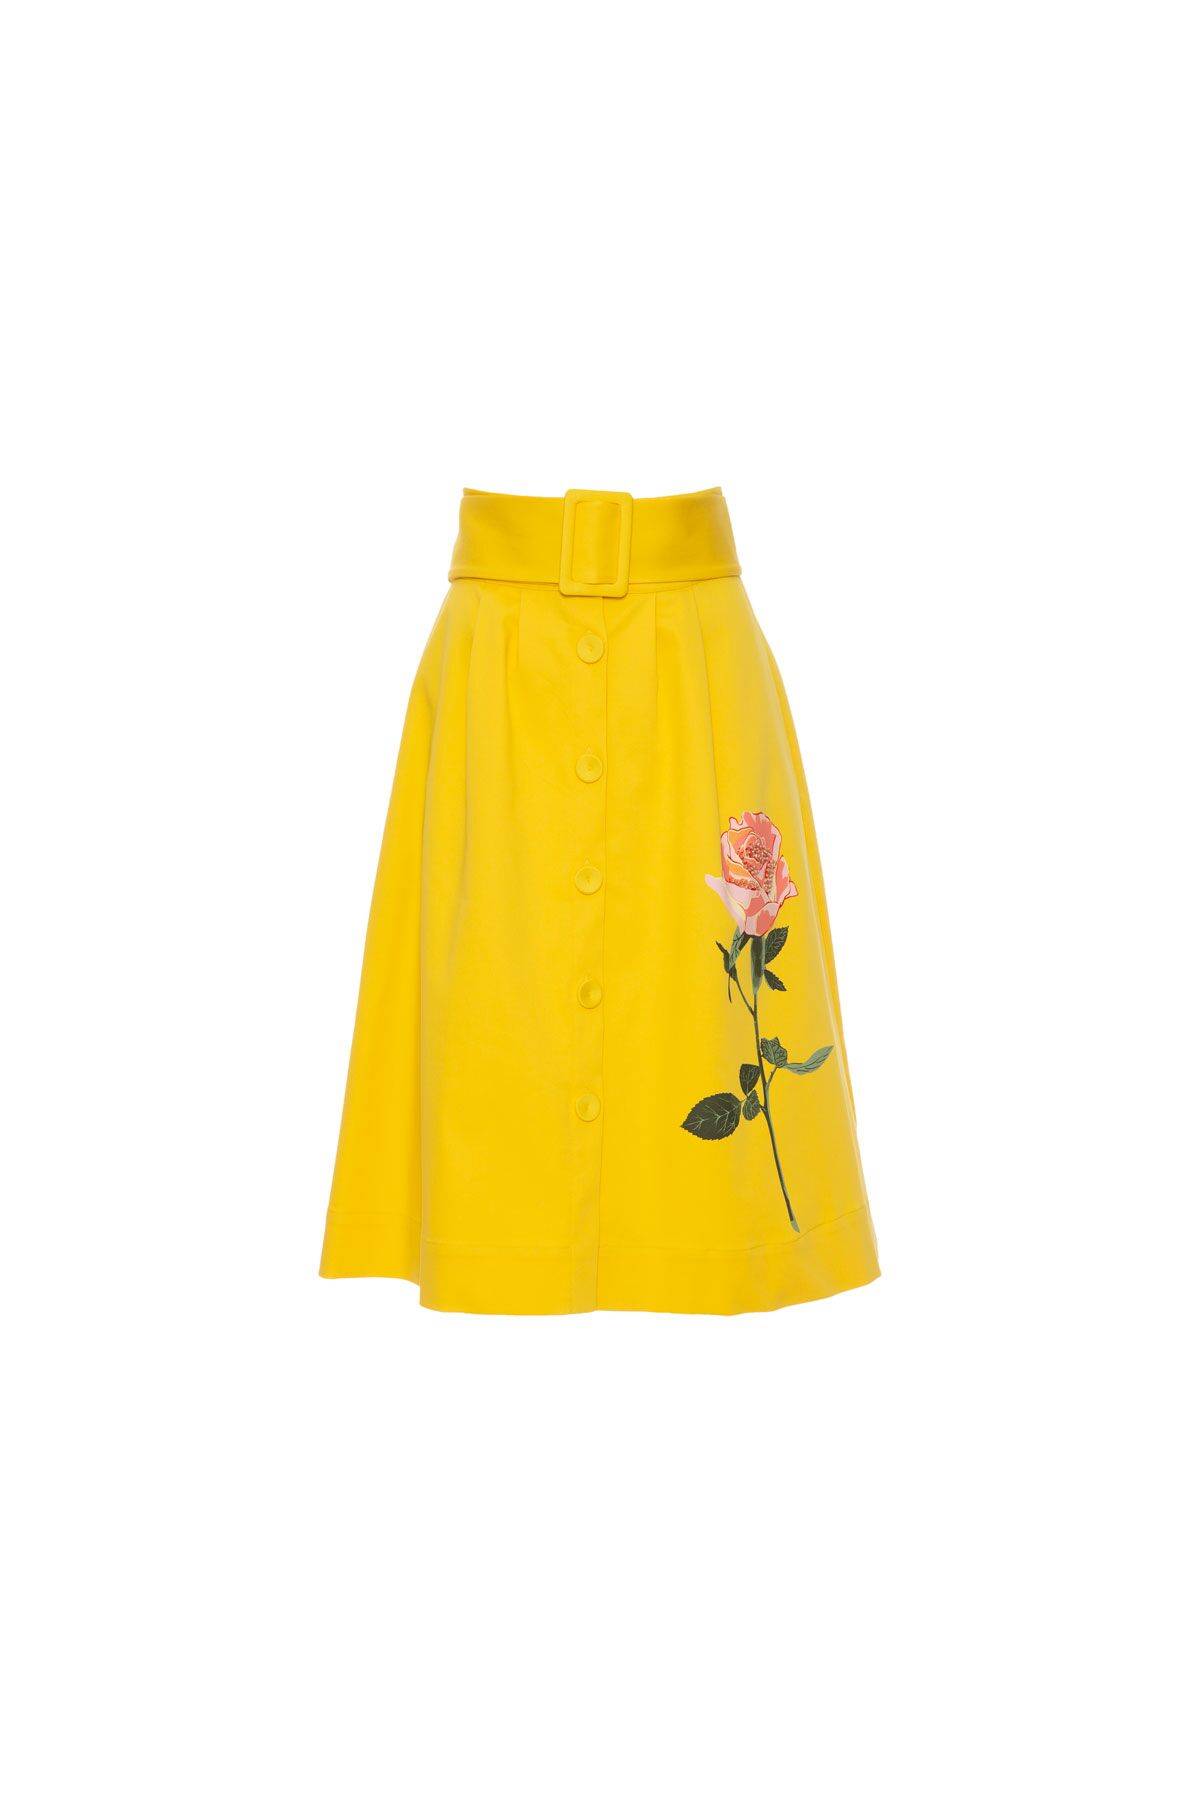 GIZIA - Tropical Patterned Yellow Flared Skirt